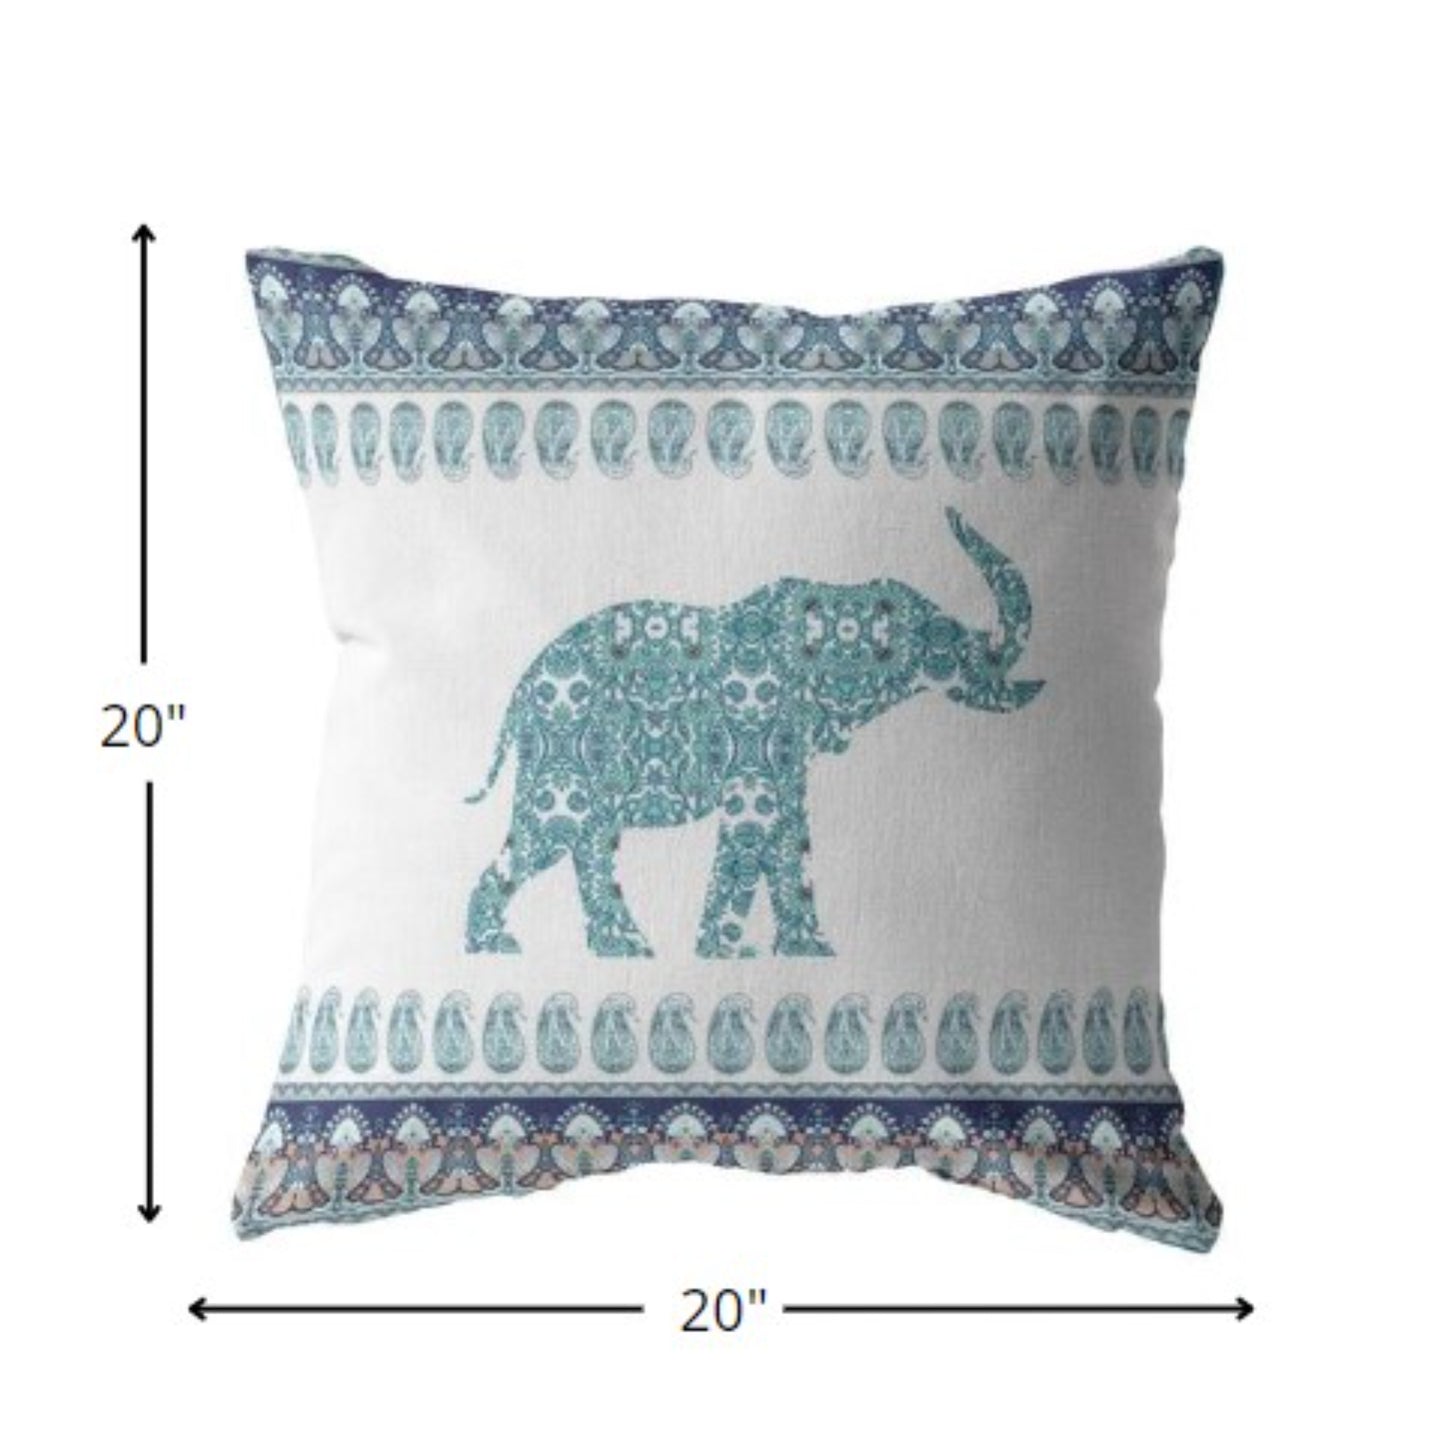 18” Teal Ornate Elephant Suede Throw Pillow